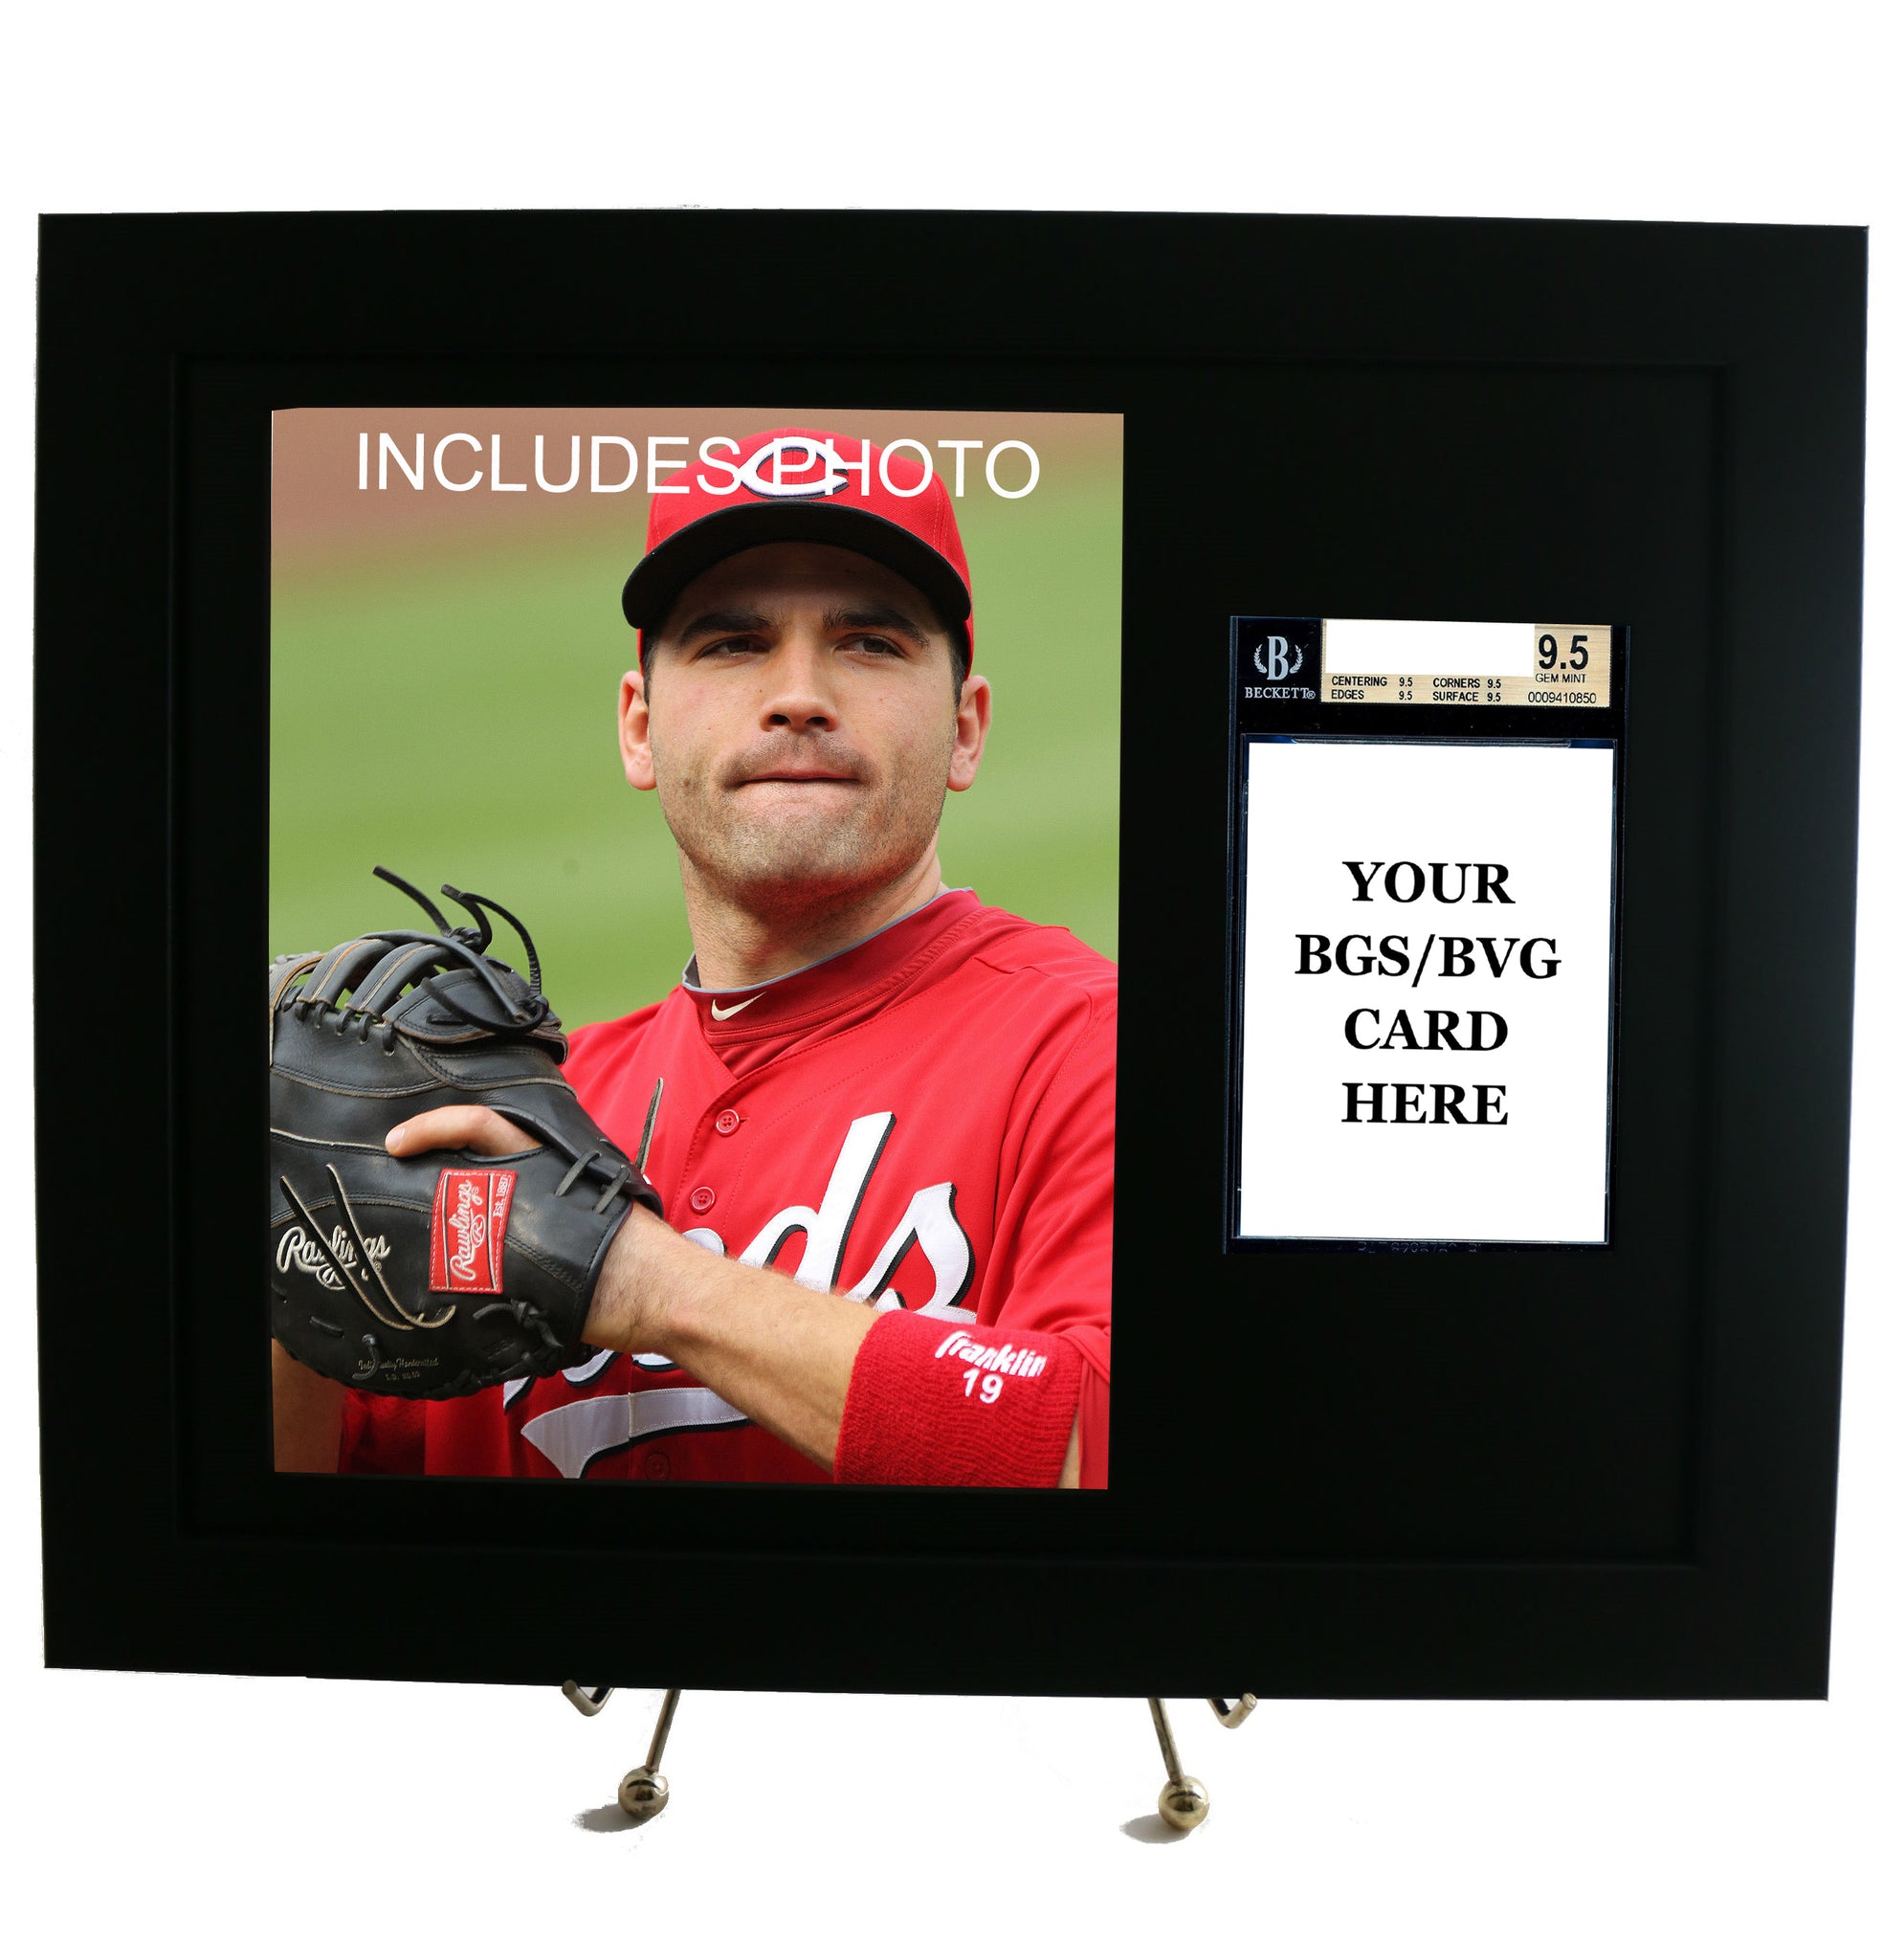 Graded Sports Card Frame for YOUR BGS (Beckett) Joey Votto Card (INCLUDES PHOTO) - Graded And Framed